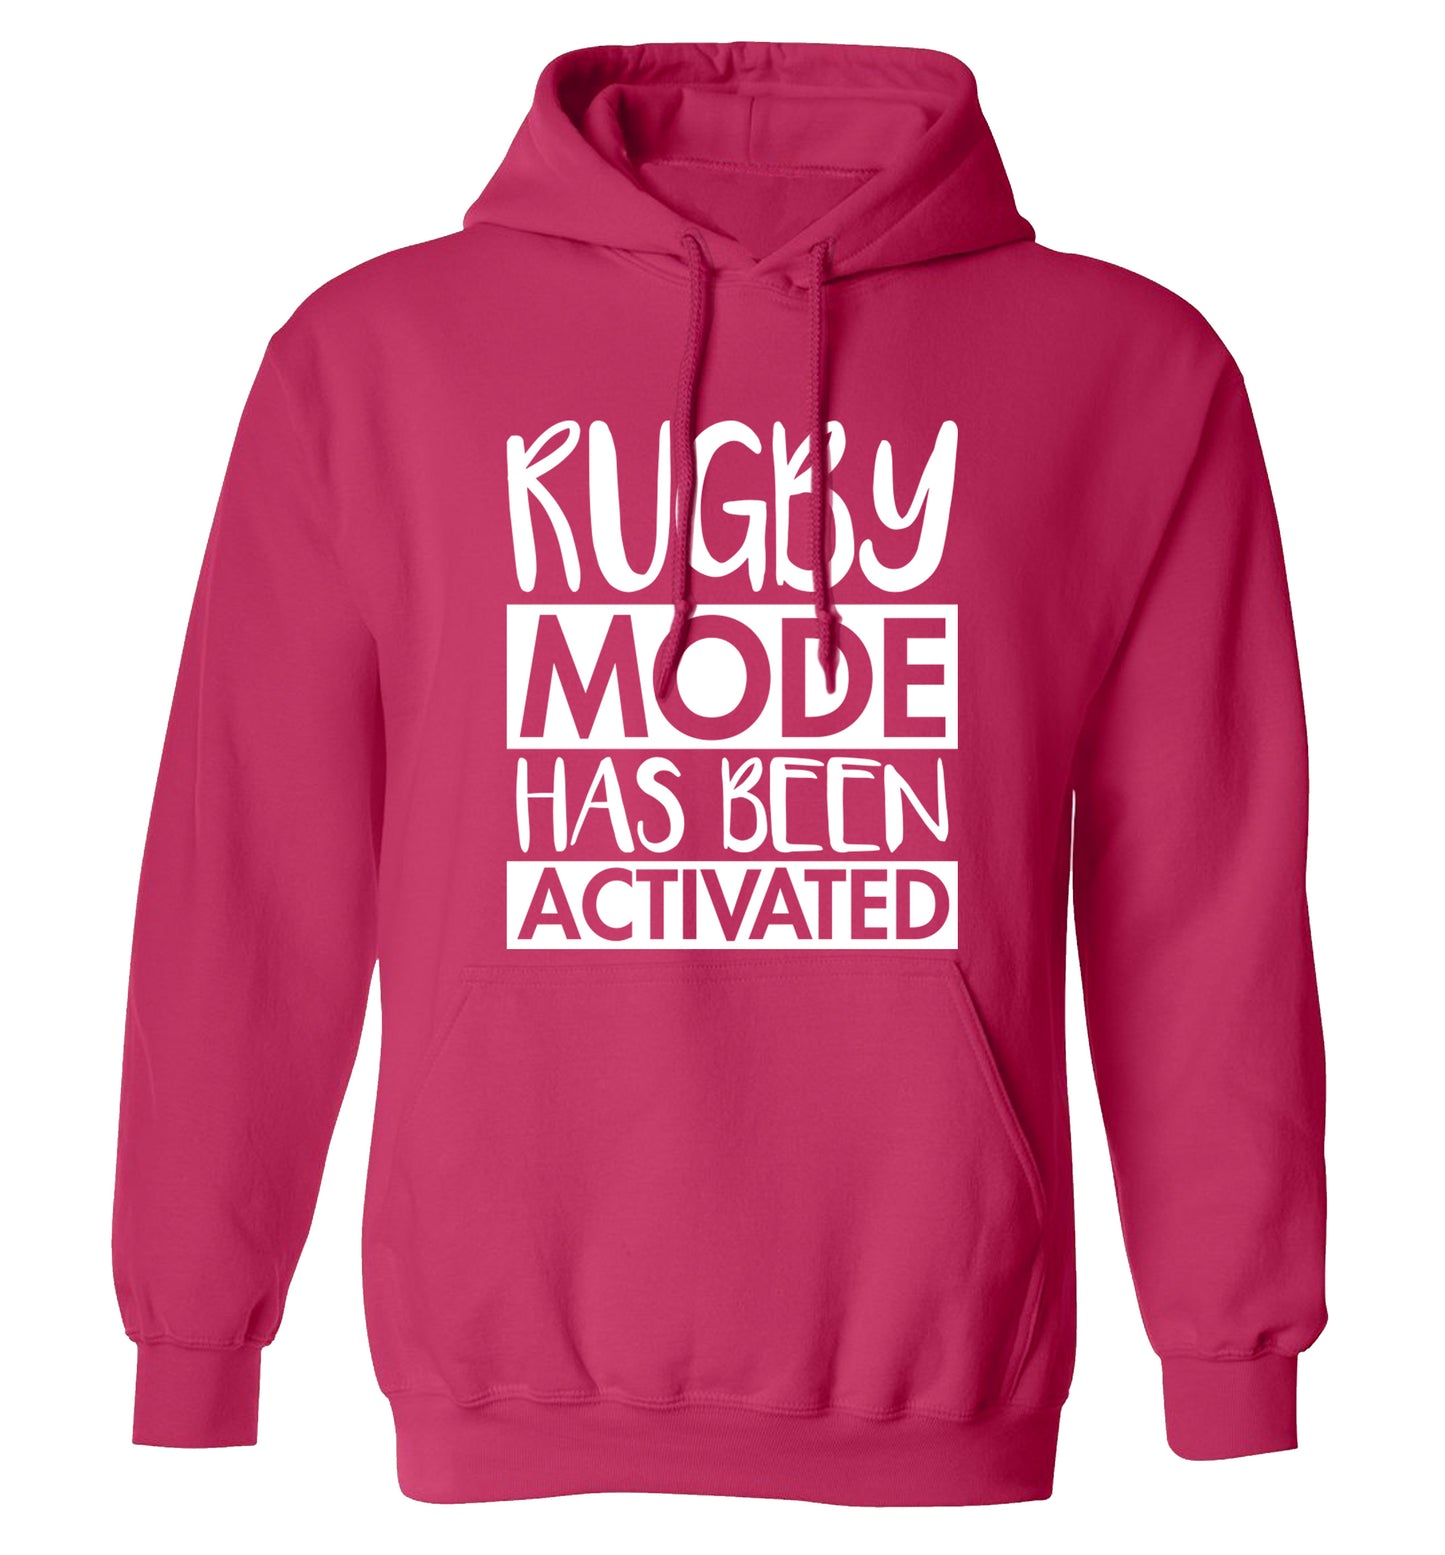 Rugby mode activated adults unisex pink hoodie 2XL